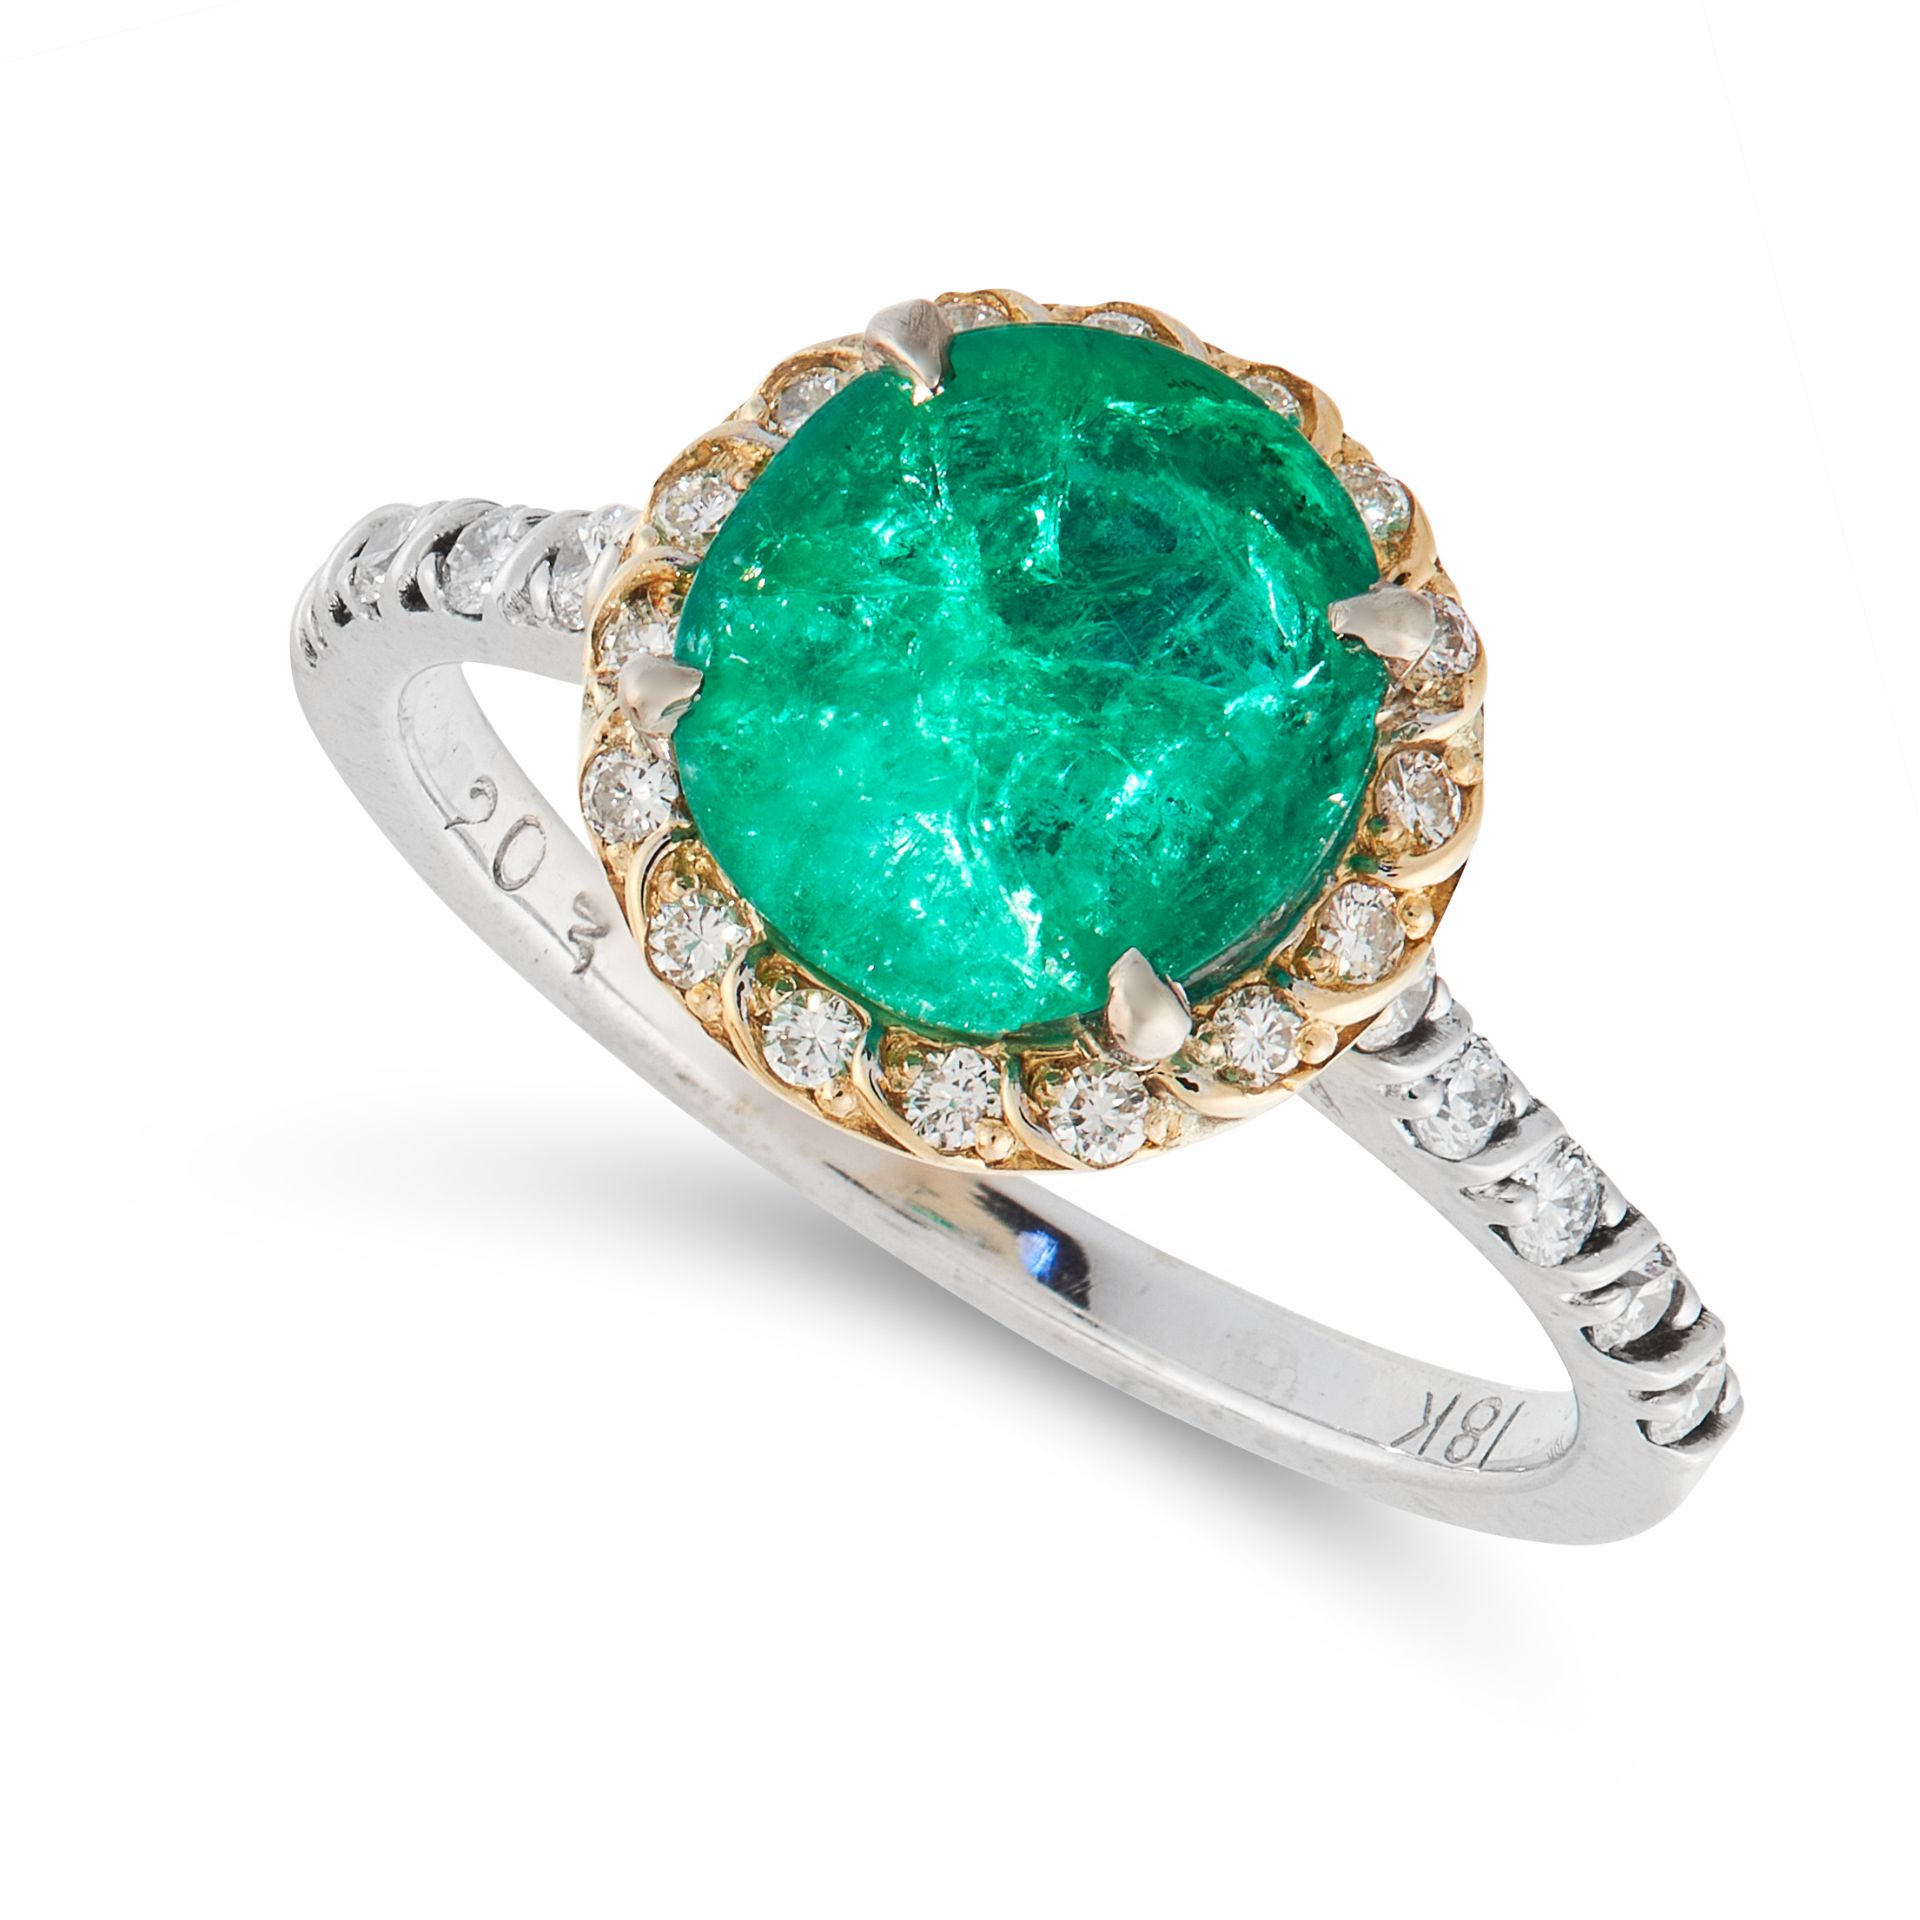 AN EMERALD AND DIAMOND CLUSTER RING in 18ct white gold, set with a round cut emerald of 1.0 carats